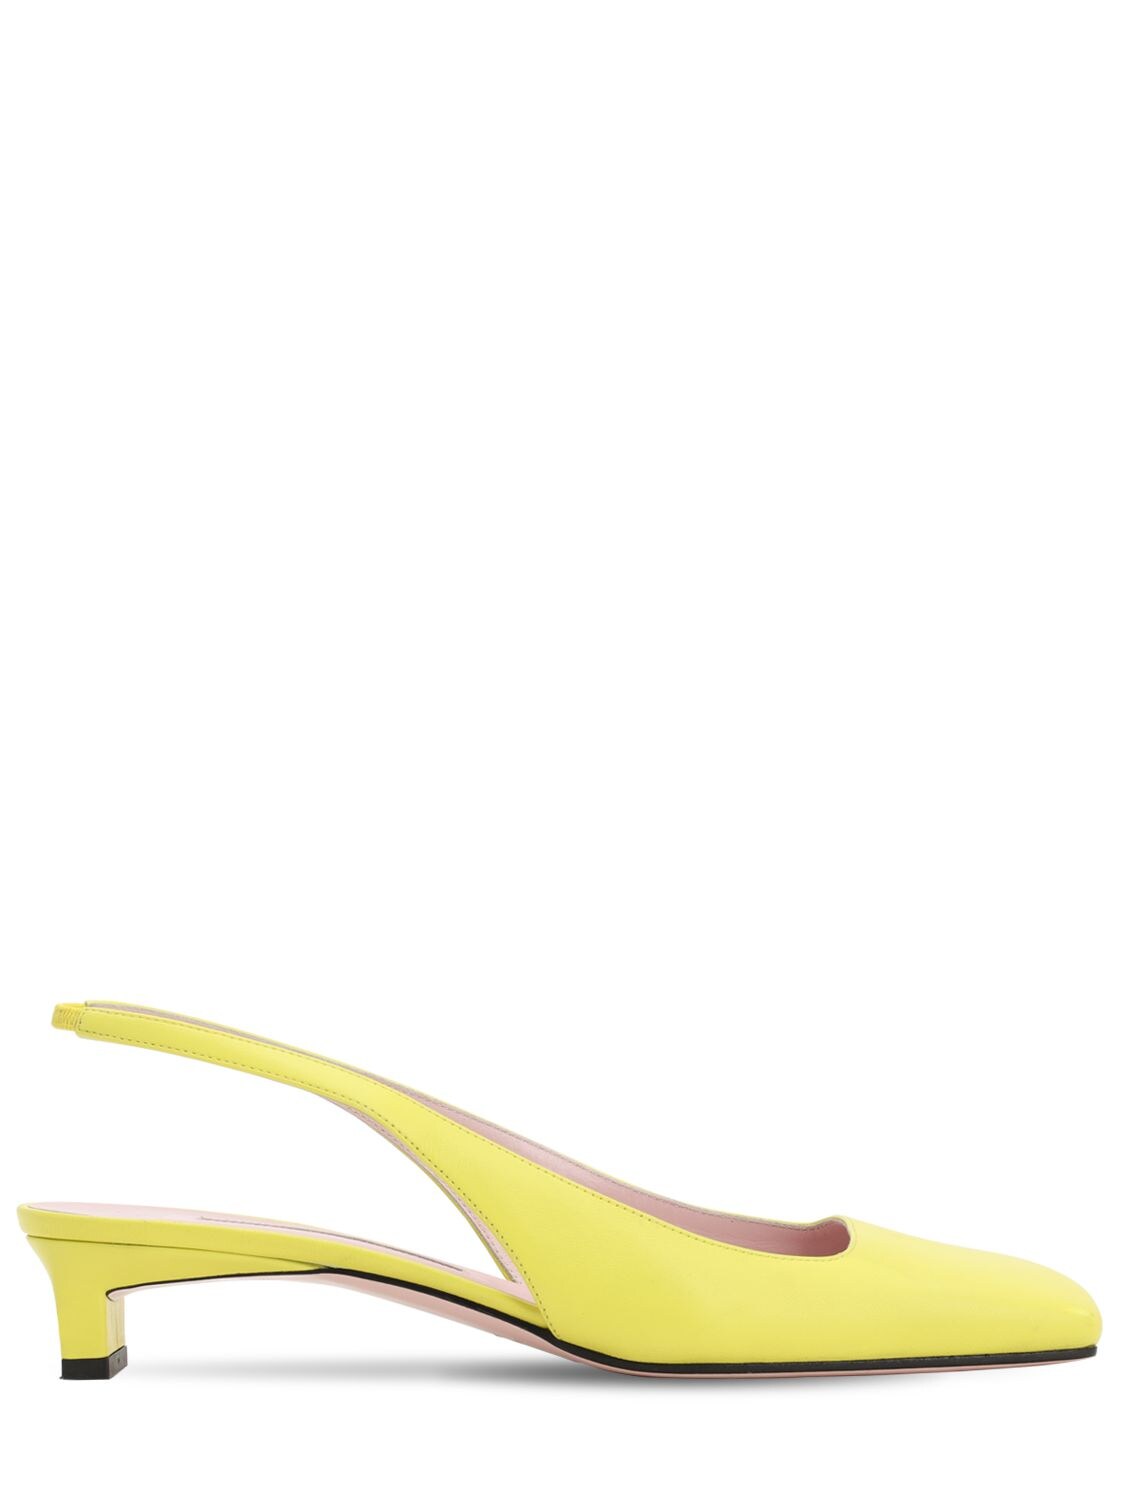 Emilia Wickstead 35mm Leather Slingback Pumps In Yellow